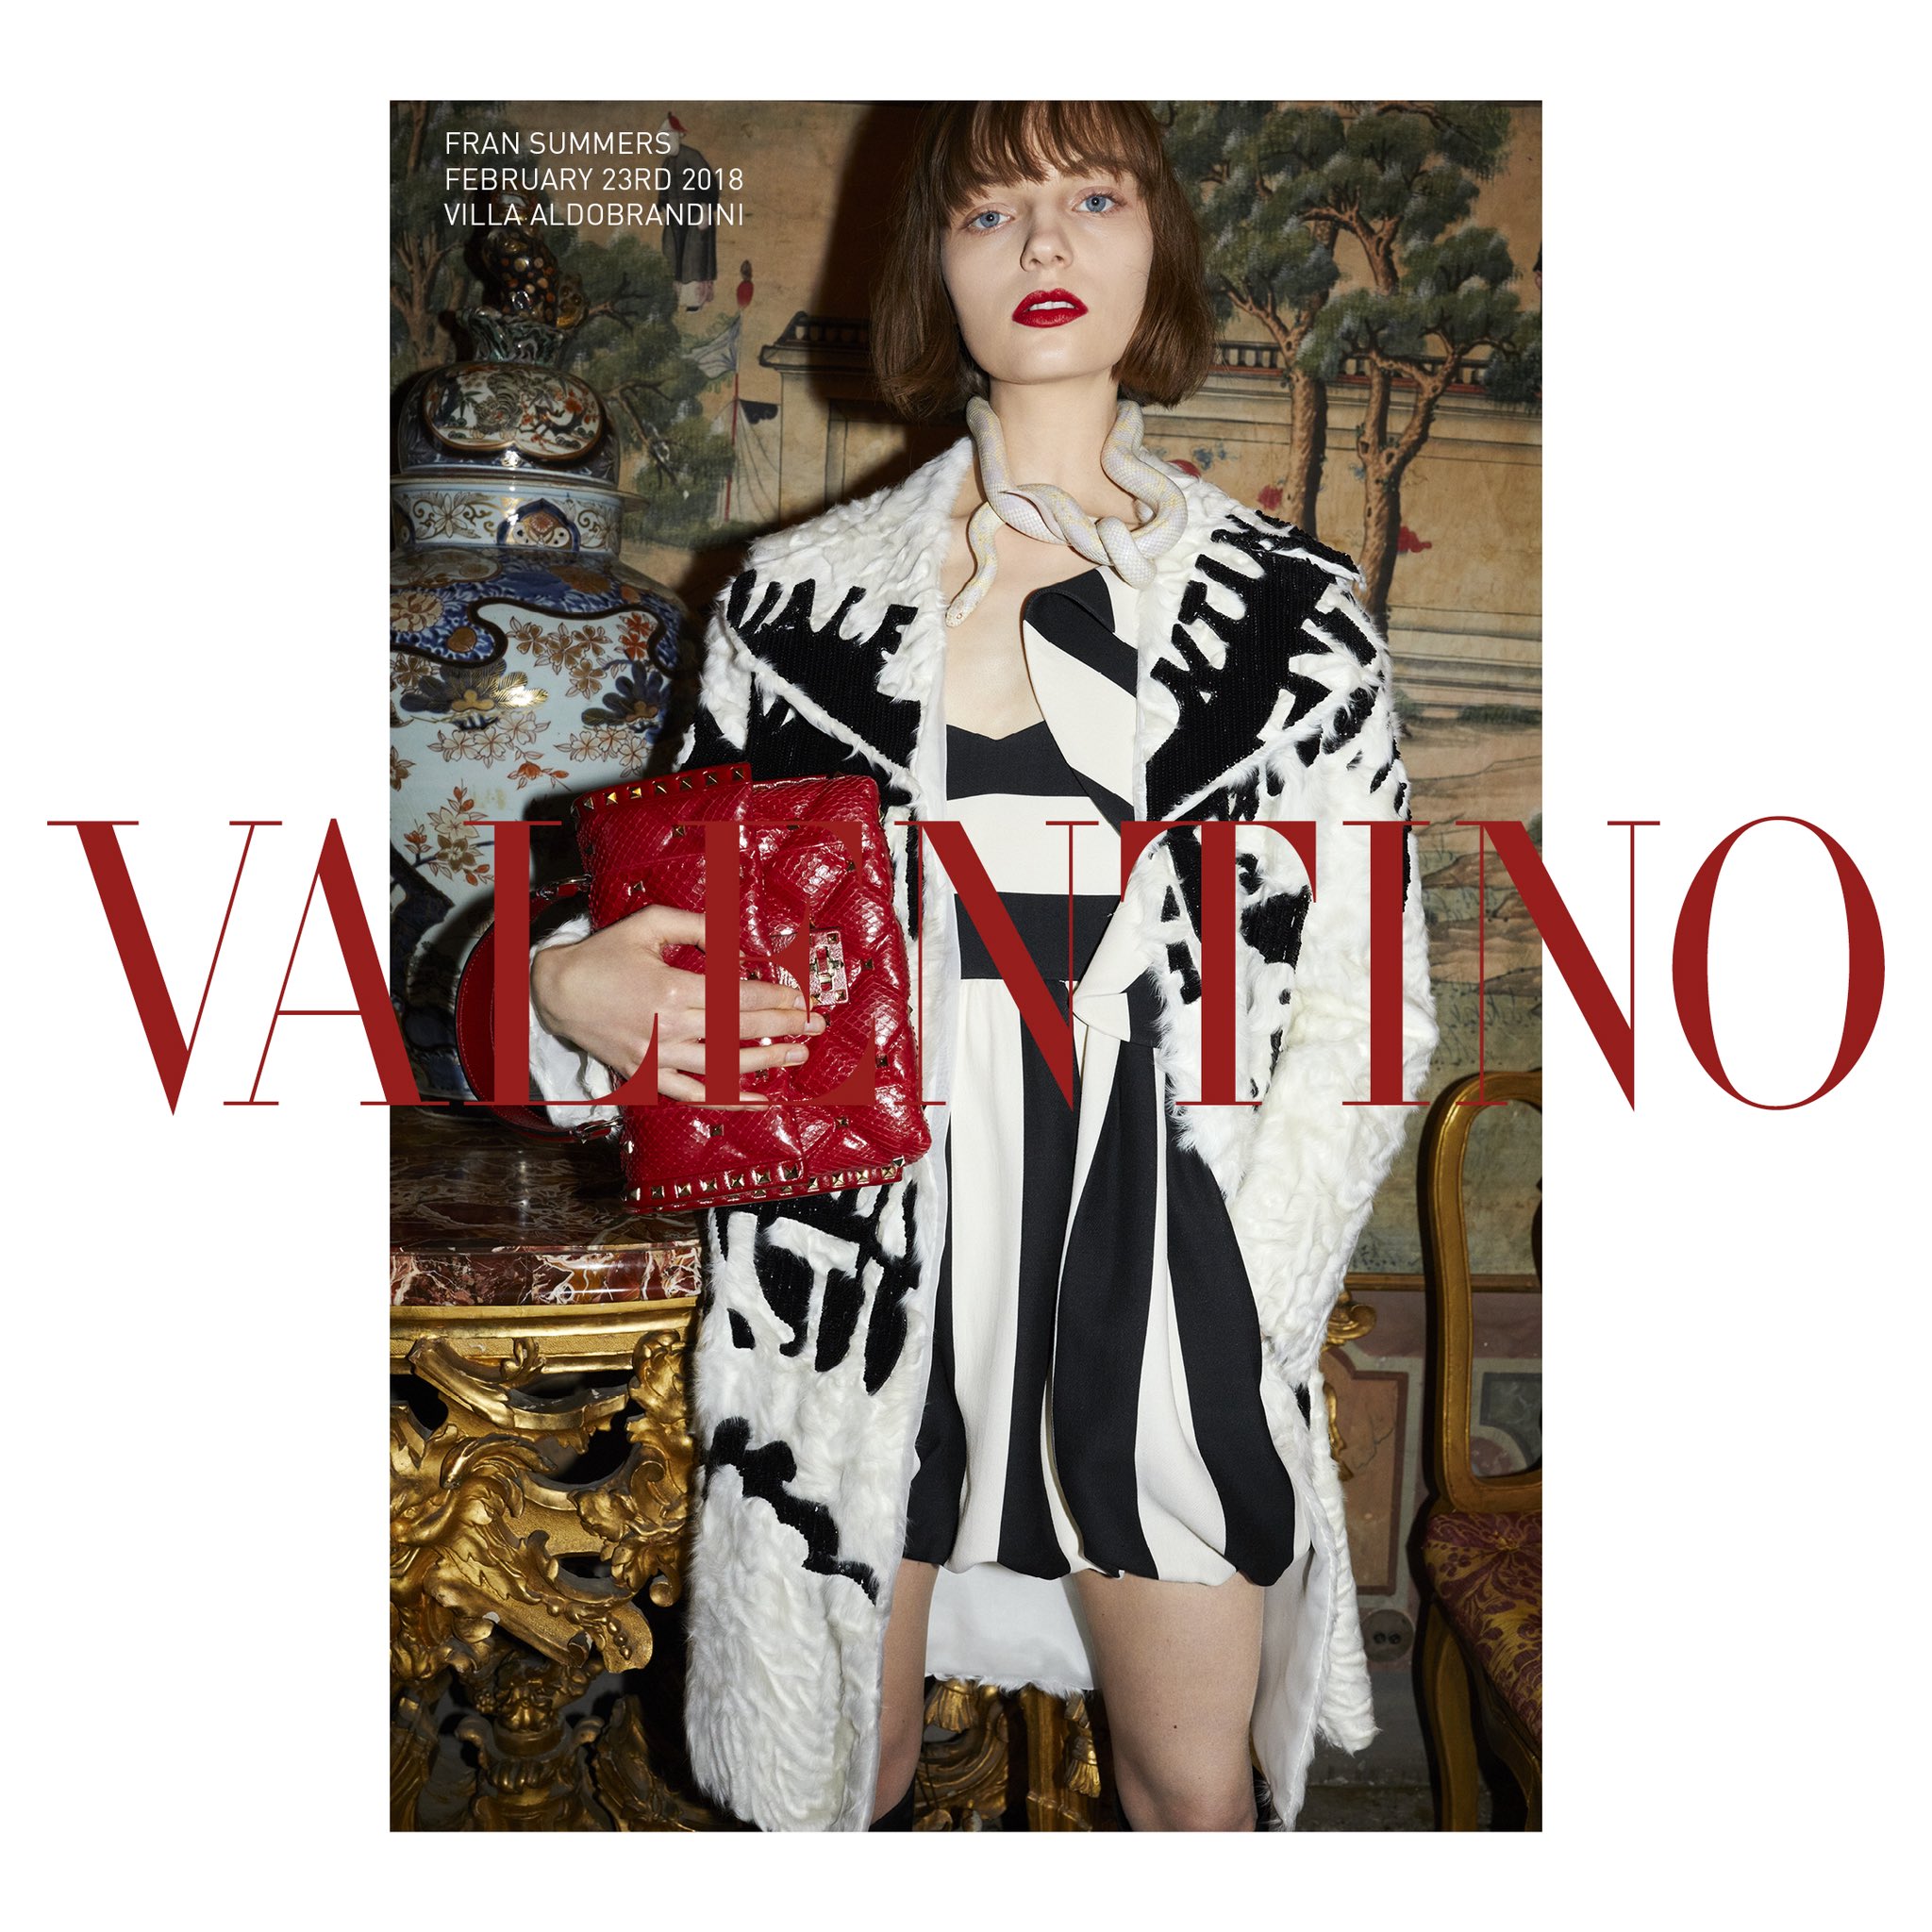 Valentino on Twitter: "The turns romanticism into a bold Pictured, #FraSummers with the Maison's newest icon the Valentino Garavani #CandyStud bag. #HautePunk Creative Director: #PierpaoloPiccioli Location: Villa